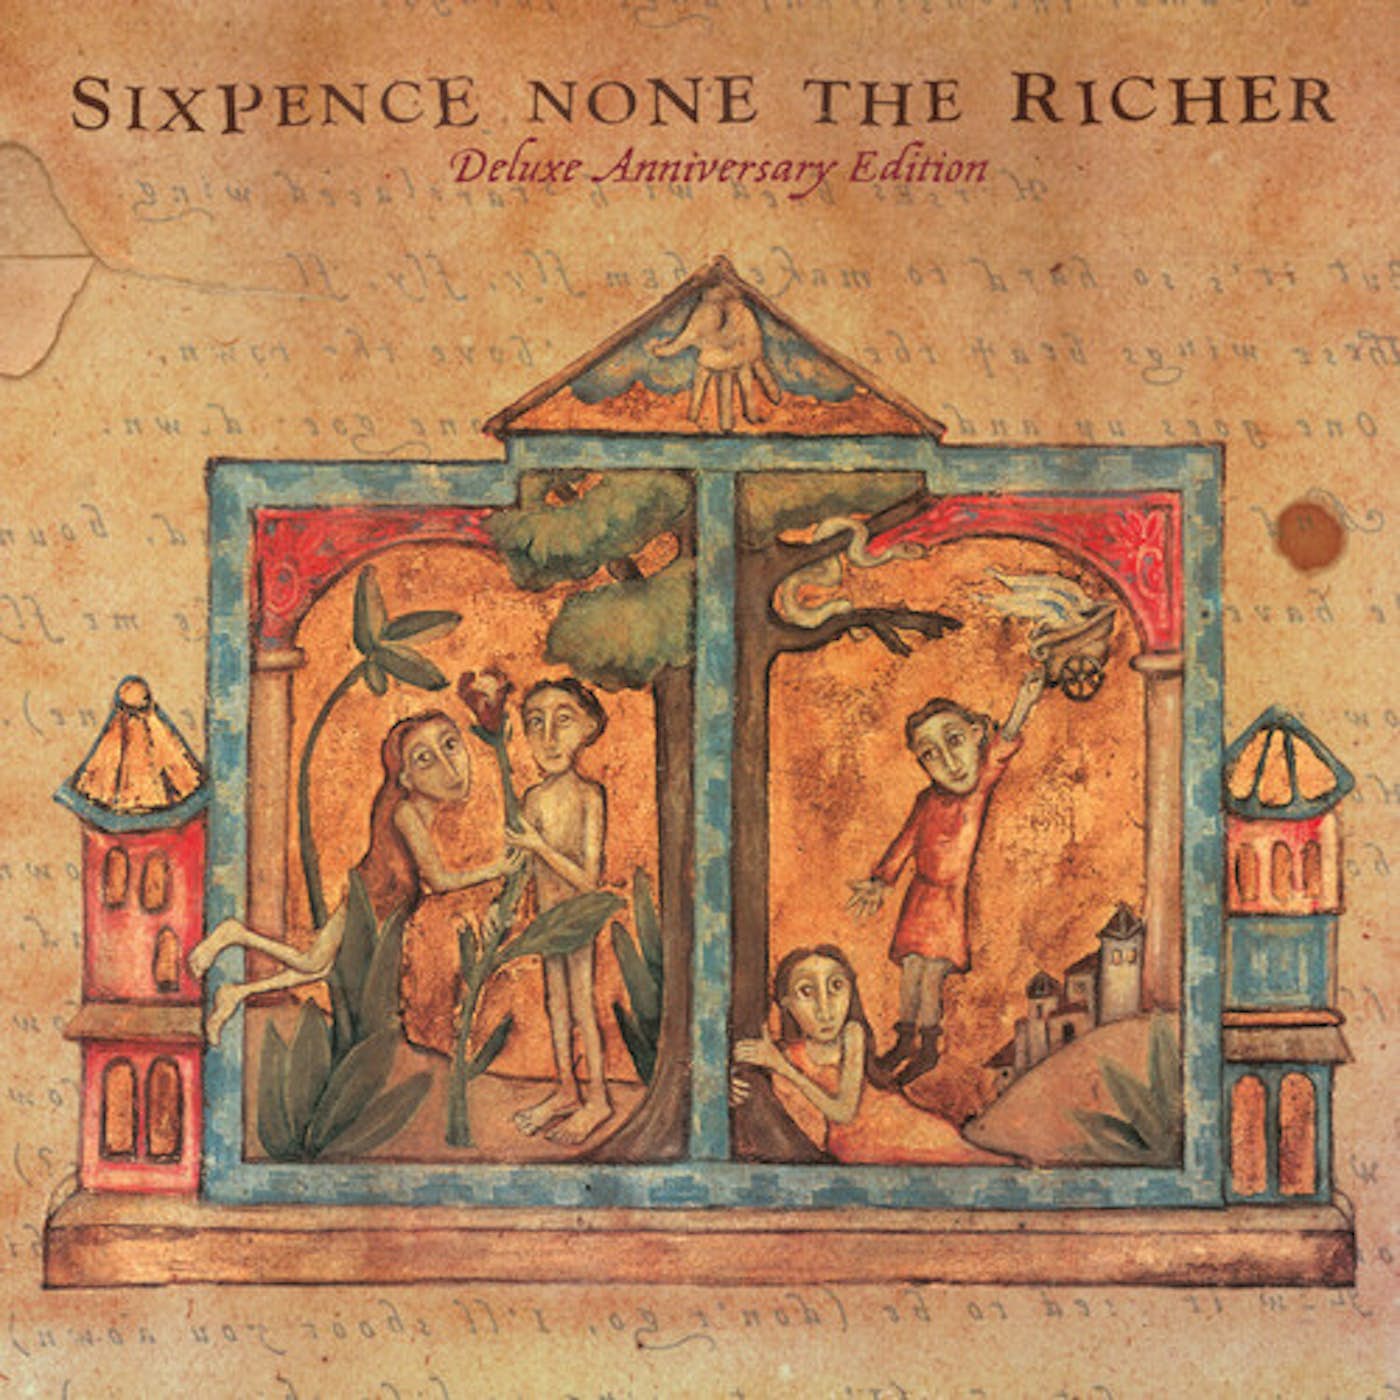 Sixpence None The Richer CD (Deluxe Anniversary Edition)